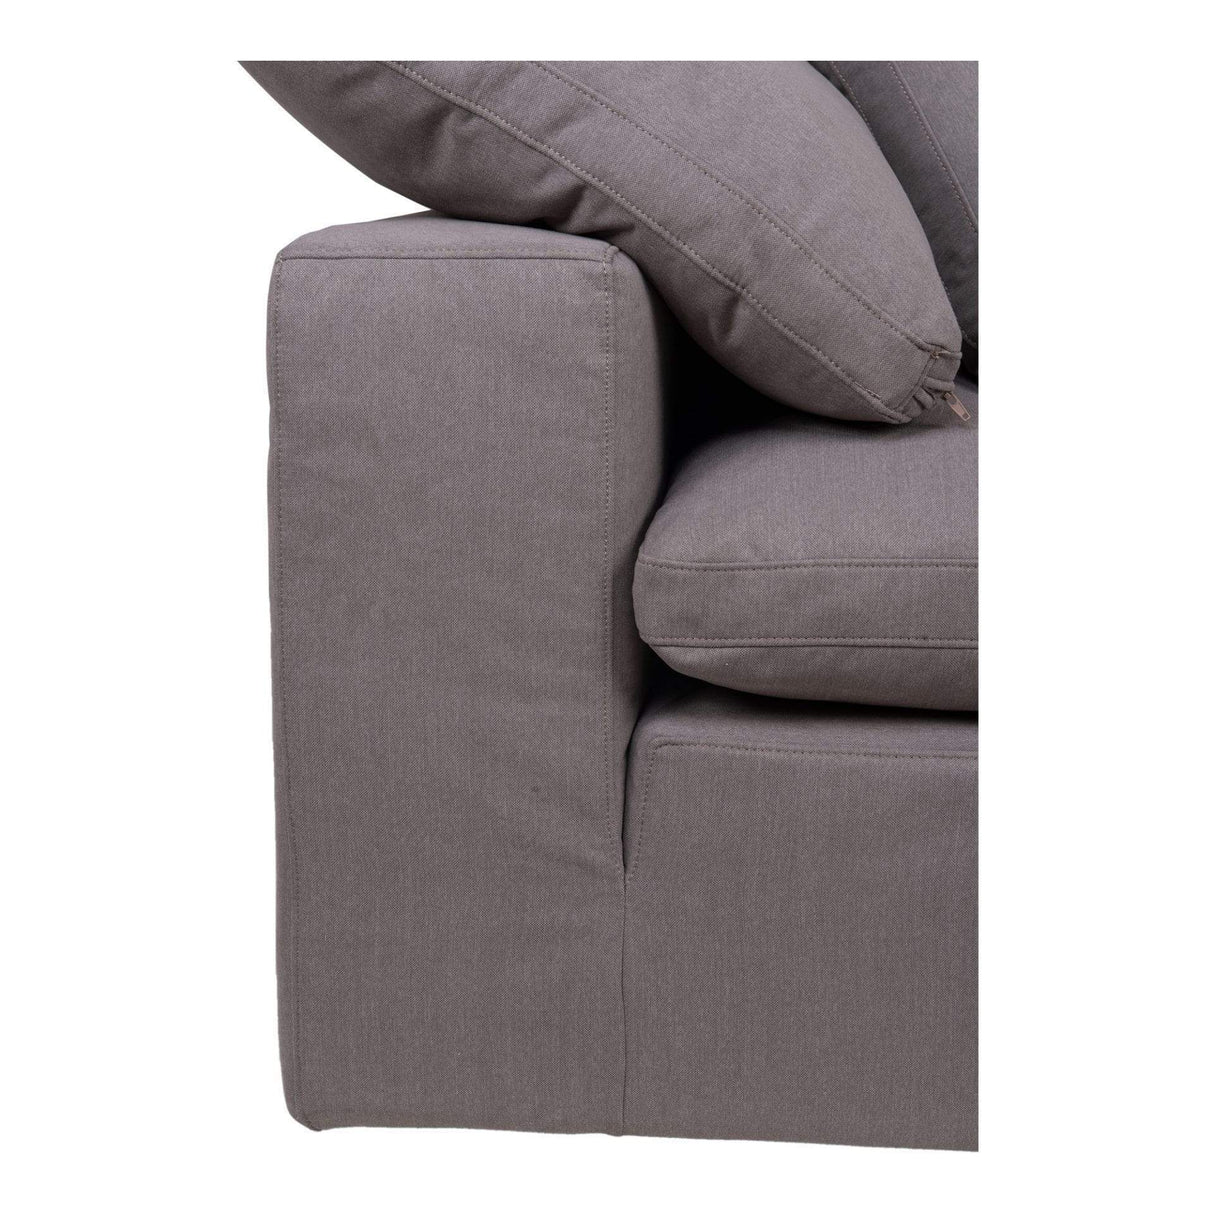 BLU Home Clay Nook Sectional in LiveSmart Fabric Furniture